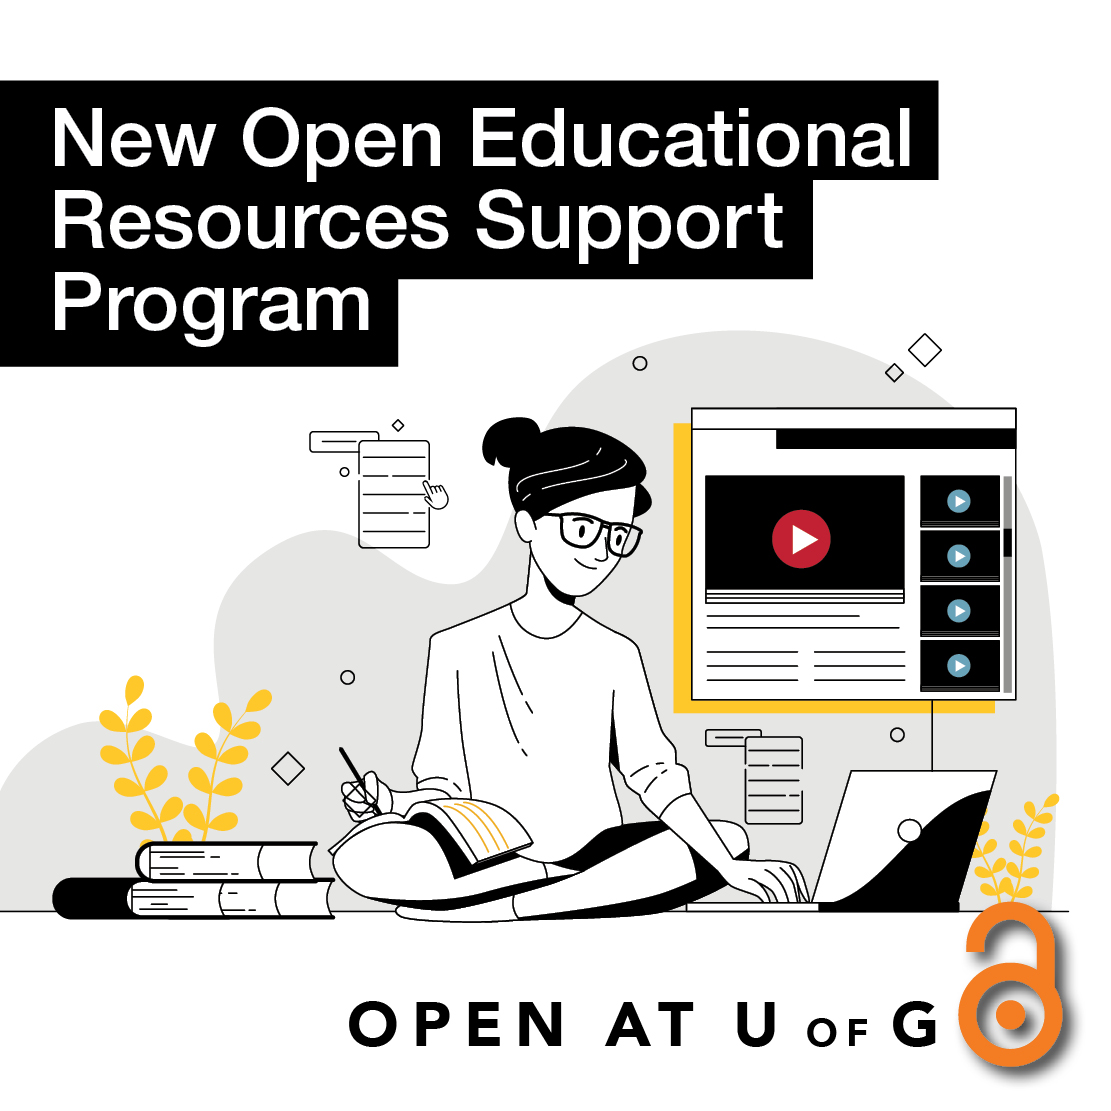 New Open Educational Resources Support Program. Open at U of G.